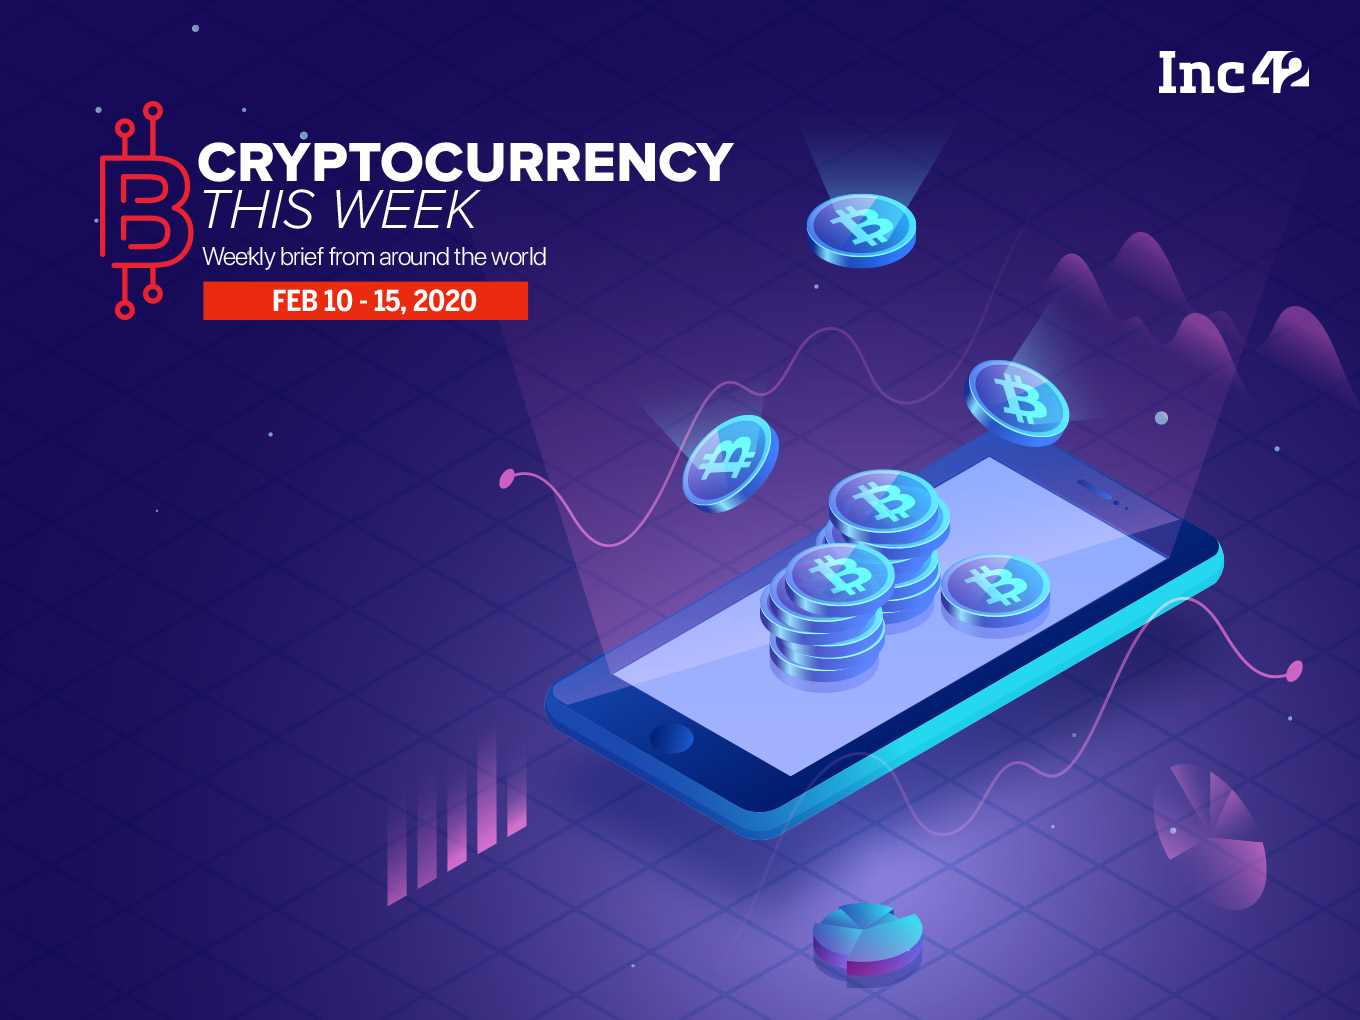 Cryptocurrency Updates: CoinDCX Partners OKEx, IAMAI Case And More